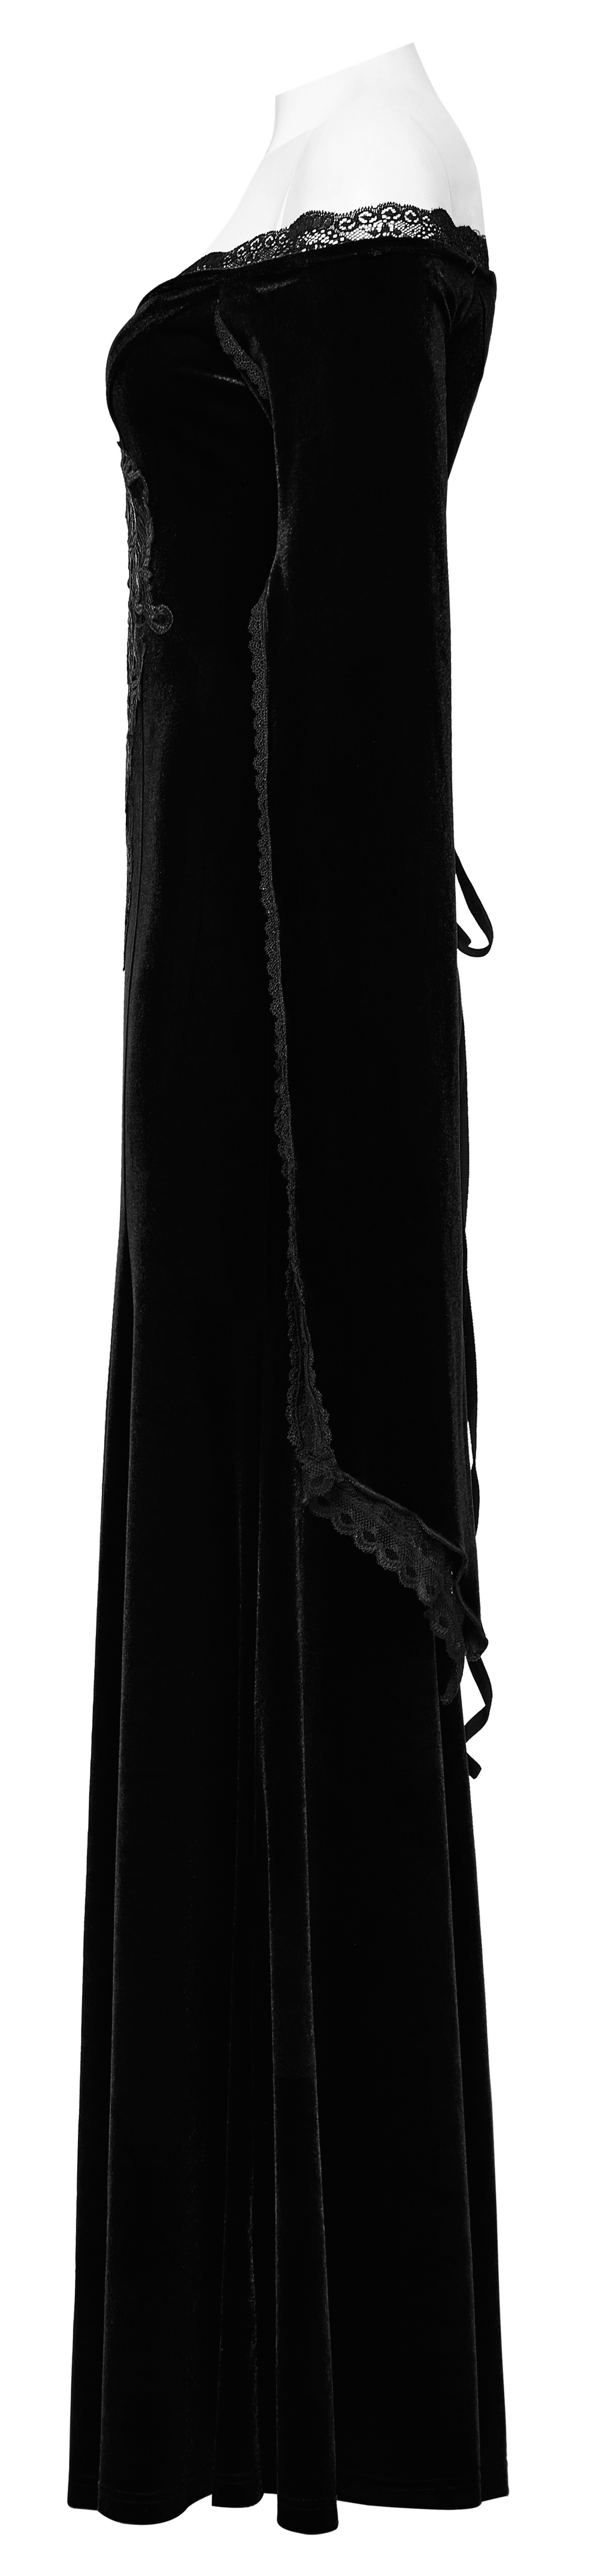 Velvet Lace Goth Dress with Decal and Split Sleeves - HARD'N'HEAVY